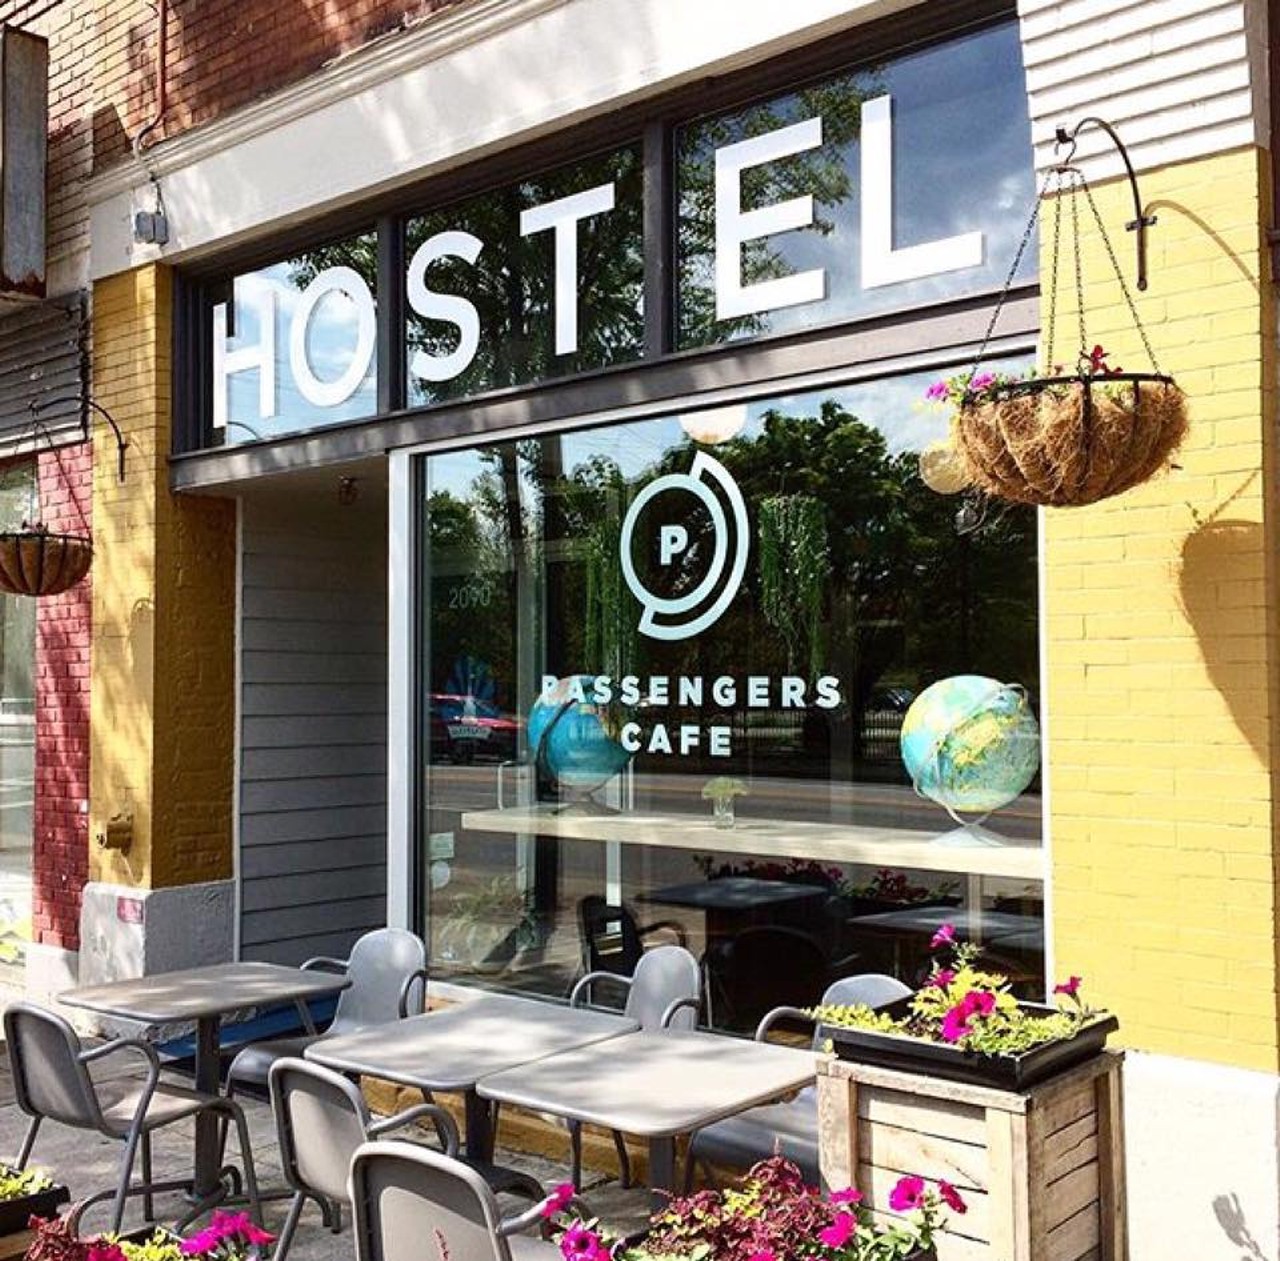 Spend a night at the Cleveland Hostel
2090 W. 25th St., 216-394-0616
If you want to become more acquanted with Ohio City, spend a night in the newly opened Cleveland Hostel. It's the only hostel in the city and offers shared and private rooms. There's a roof deck on top to hangout on and a top notch cafe called Passengers (open to the public) located below.
Photo via Cleveland Hostel/Facebook